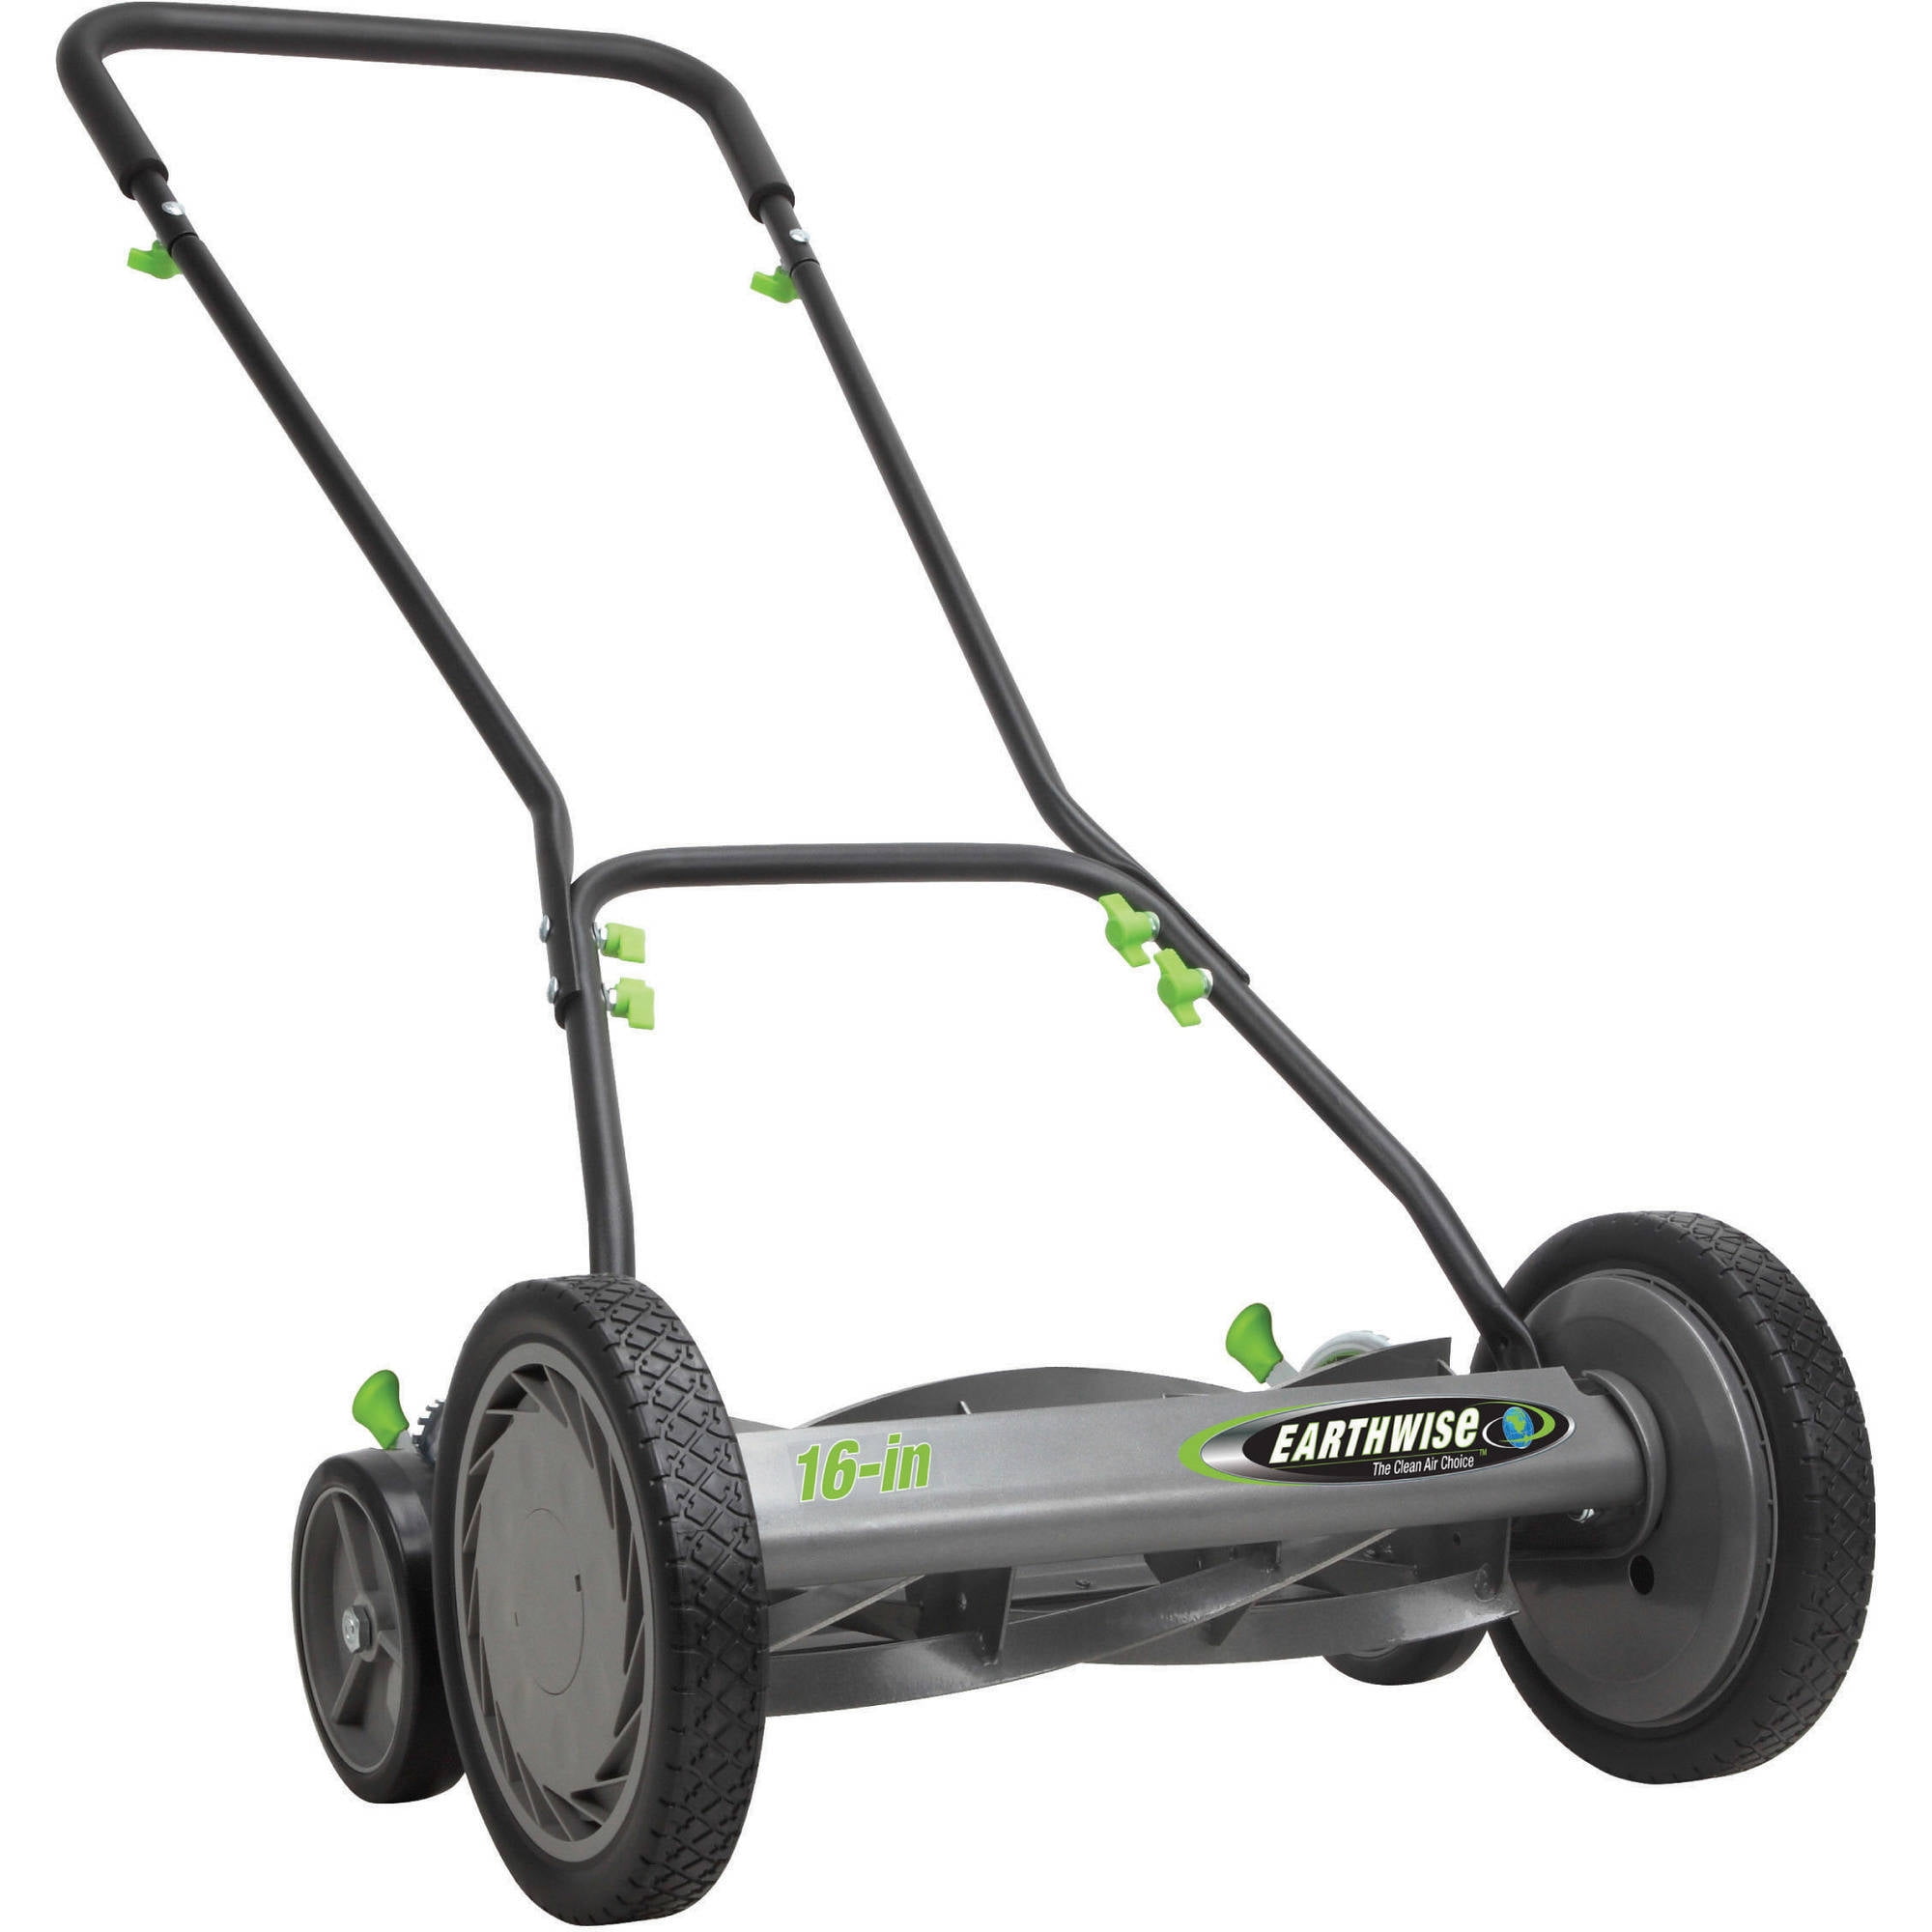 Earthwise 18" Push Reel Mower with Trailing Wheels